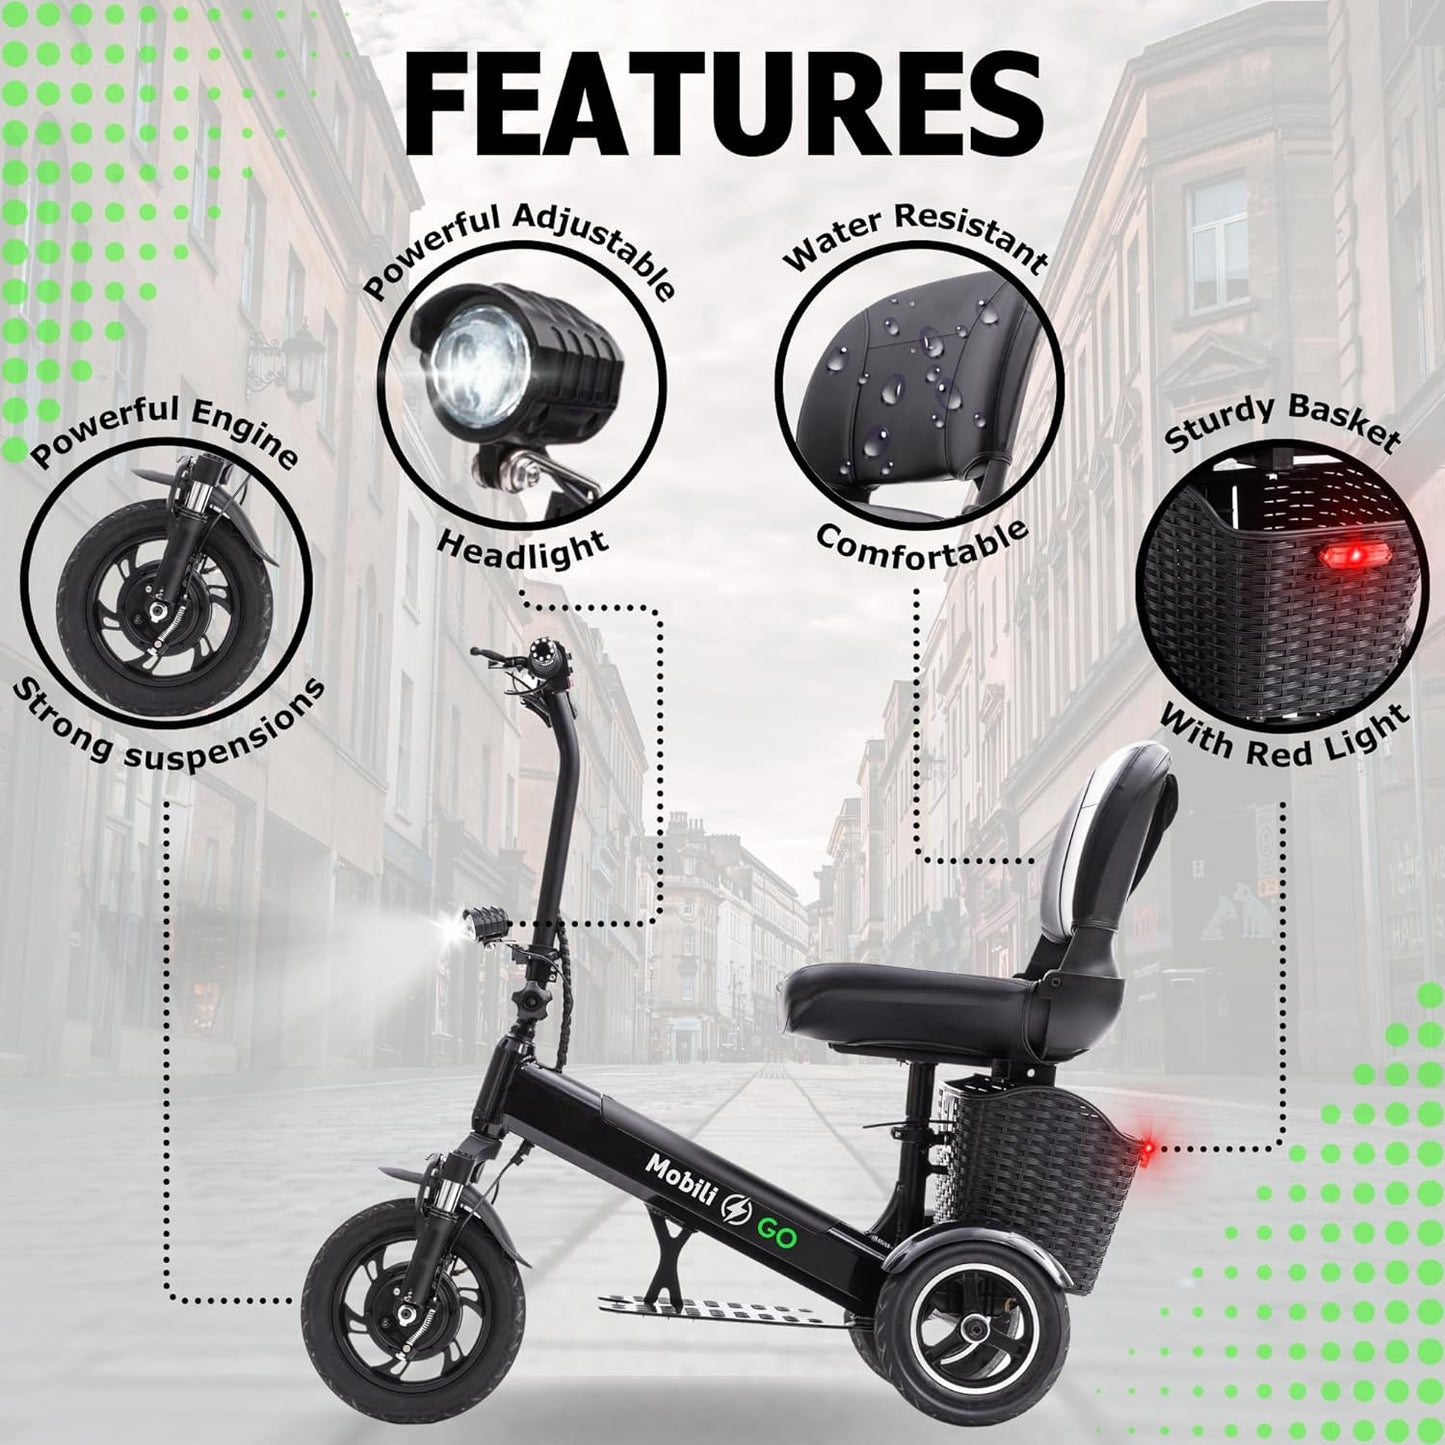 MobiliGo - 3 Wheel Foldable Electric Mobility Scooters for Adults, Seniors, and Elderly - Folding Scooter Lightweight - Long Range Travel, Power Extended Battery with Charger and Basket Included